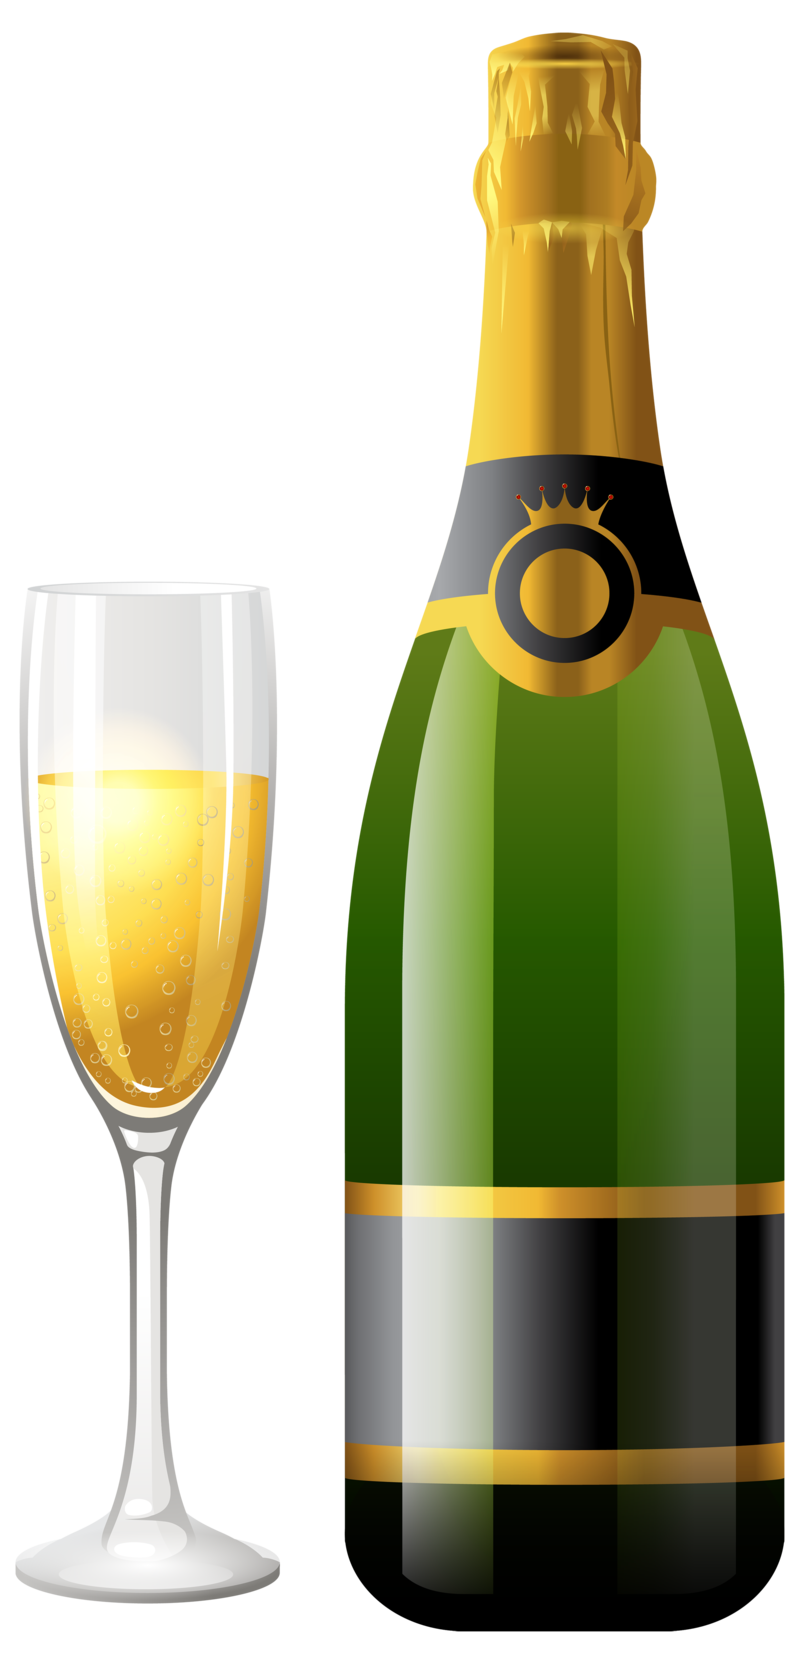 Champagne_Bottle_with_Glass_PNG_Clipart-626.png